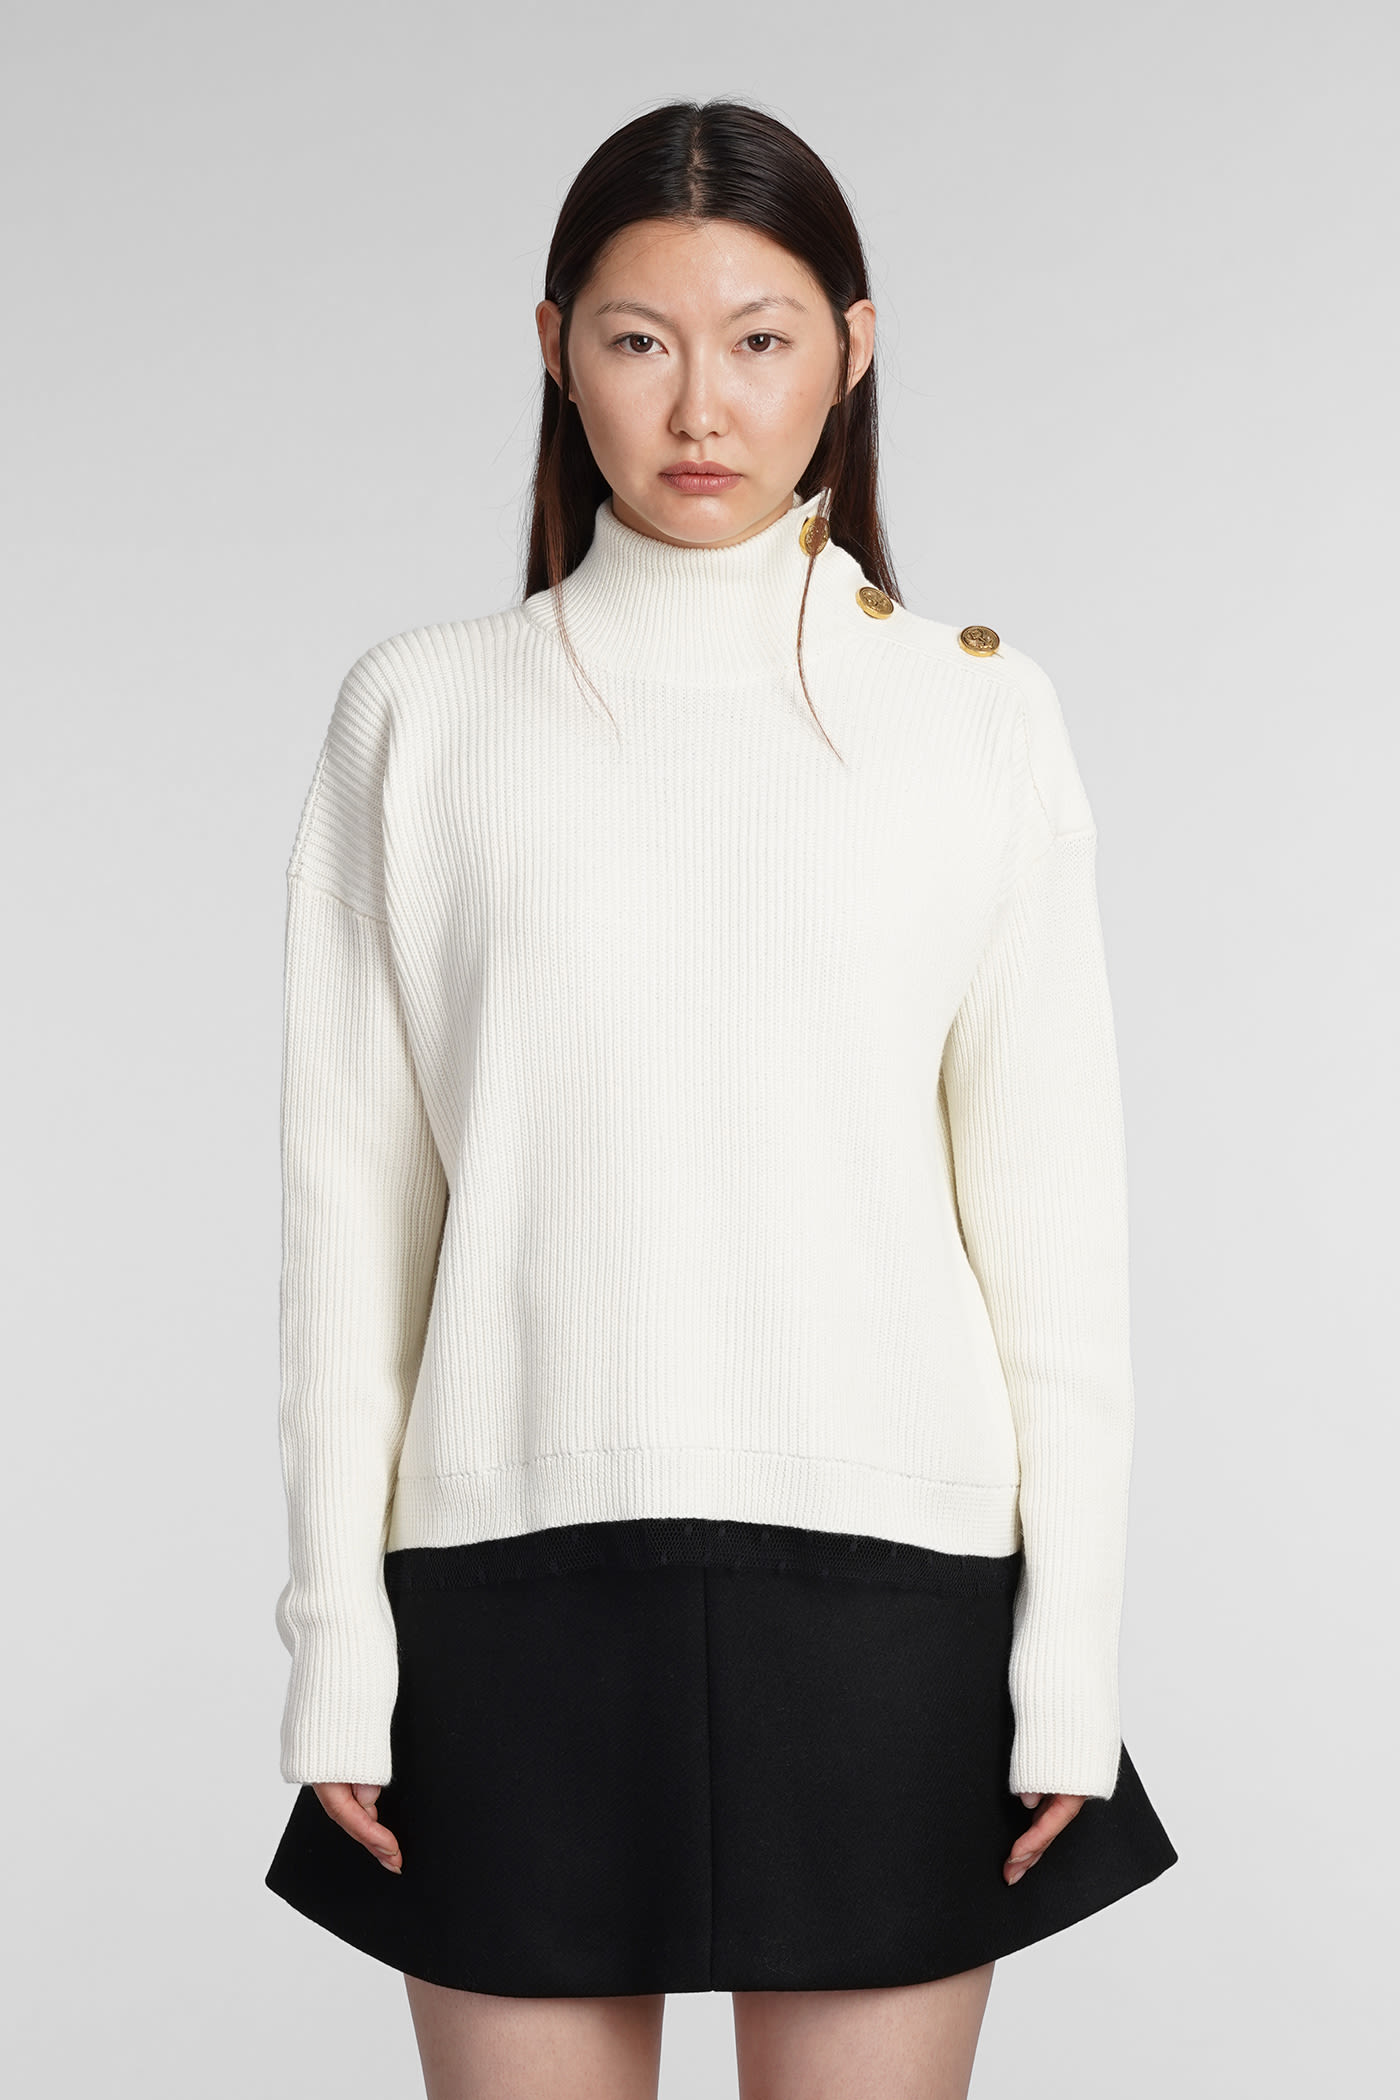 RED VALENTINO KNITWEAR IN WHITE WOOL